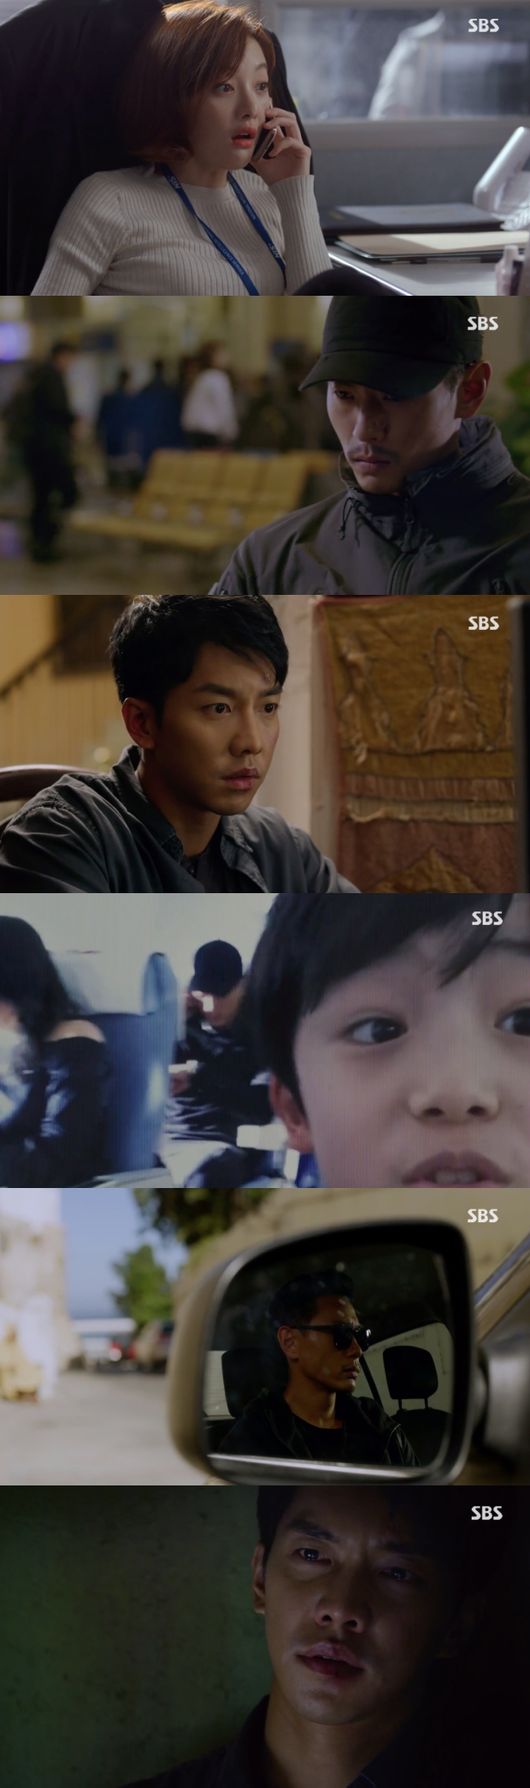 Vagabond Teo Yoo stepped out to Churdan himself, wary of Lee Seung-gi, who knows he is a Terrorists.In the second episode of SBS gilt drama Vagabond (playplayed by Jang Young-chul, Jung Kyung-soon, and directed by Yoo In-sik), which was broadcast on the 21st, Cha Dal-gun (Lee Seung-gi) made a plan to catch Terorists (Teo Yoo) with the help of NIS agent Go Hae-ri (Bae Suzy).Earlier, Chadal Gun saw the face of Terrorists in a video he had filmed inside the Planes to Morocco before his nephew died.The bereaved families and Chadalgan, who arrived at Morocco, confirmed the survival of Terrorists at Tangier International Airport and were convinced of the terrorist attacks.Vagabond is an intelligence action drama that uncovers the corruption of the Korean government that was found in the concealed truth of Cha Dal-gun involved in the crash of a civil passenger plane.Planes is down, and theres a man alive. He shot me.Ive seen him, Ive seen him, he said, appealing to the families of the B357 crash, and reiterated, Im not crazy, Im sober.At the same time, Terrorists hid themselves in a secret residence to treat injuries sustained in their fight against Chadalgan.He laughed at the same teammate when he learned that Cha Dal-geon was a stuntman in Korea.He ignored his bosss call to return to the country, saying, Honor is more important than my life. He planned to take Chardan himself, saying, I know someone who can help me.It meant that he would hide the fact that he was a Terrorists by removing his own hand and restore his honor to the physical damage.When Cha Dal-geon found out that Ko Hae-ri was a member of the NIS of the Republic of Korea, he asked her to help him as a working officer.The video of the blog I shared with my nephew was completely deleted, and the luggage of the hostel was also robbed.While Gohari went to see Chadalgan, Terrorists trespassed into Harrys room and was devastated to see himself in the video of his nephew.Arriving at the International Civil Aviation Organization, the confession was convinced that the Terrorists were terrorists, inferring that they had spoken to the B357s deputy director in Spanish on the day of the incident.Capture the Vagabond broadcast screen